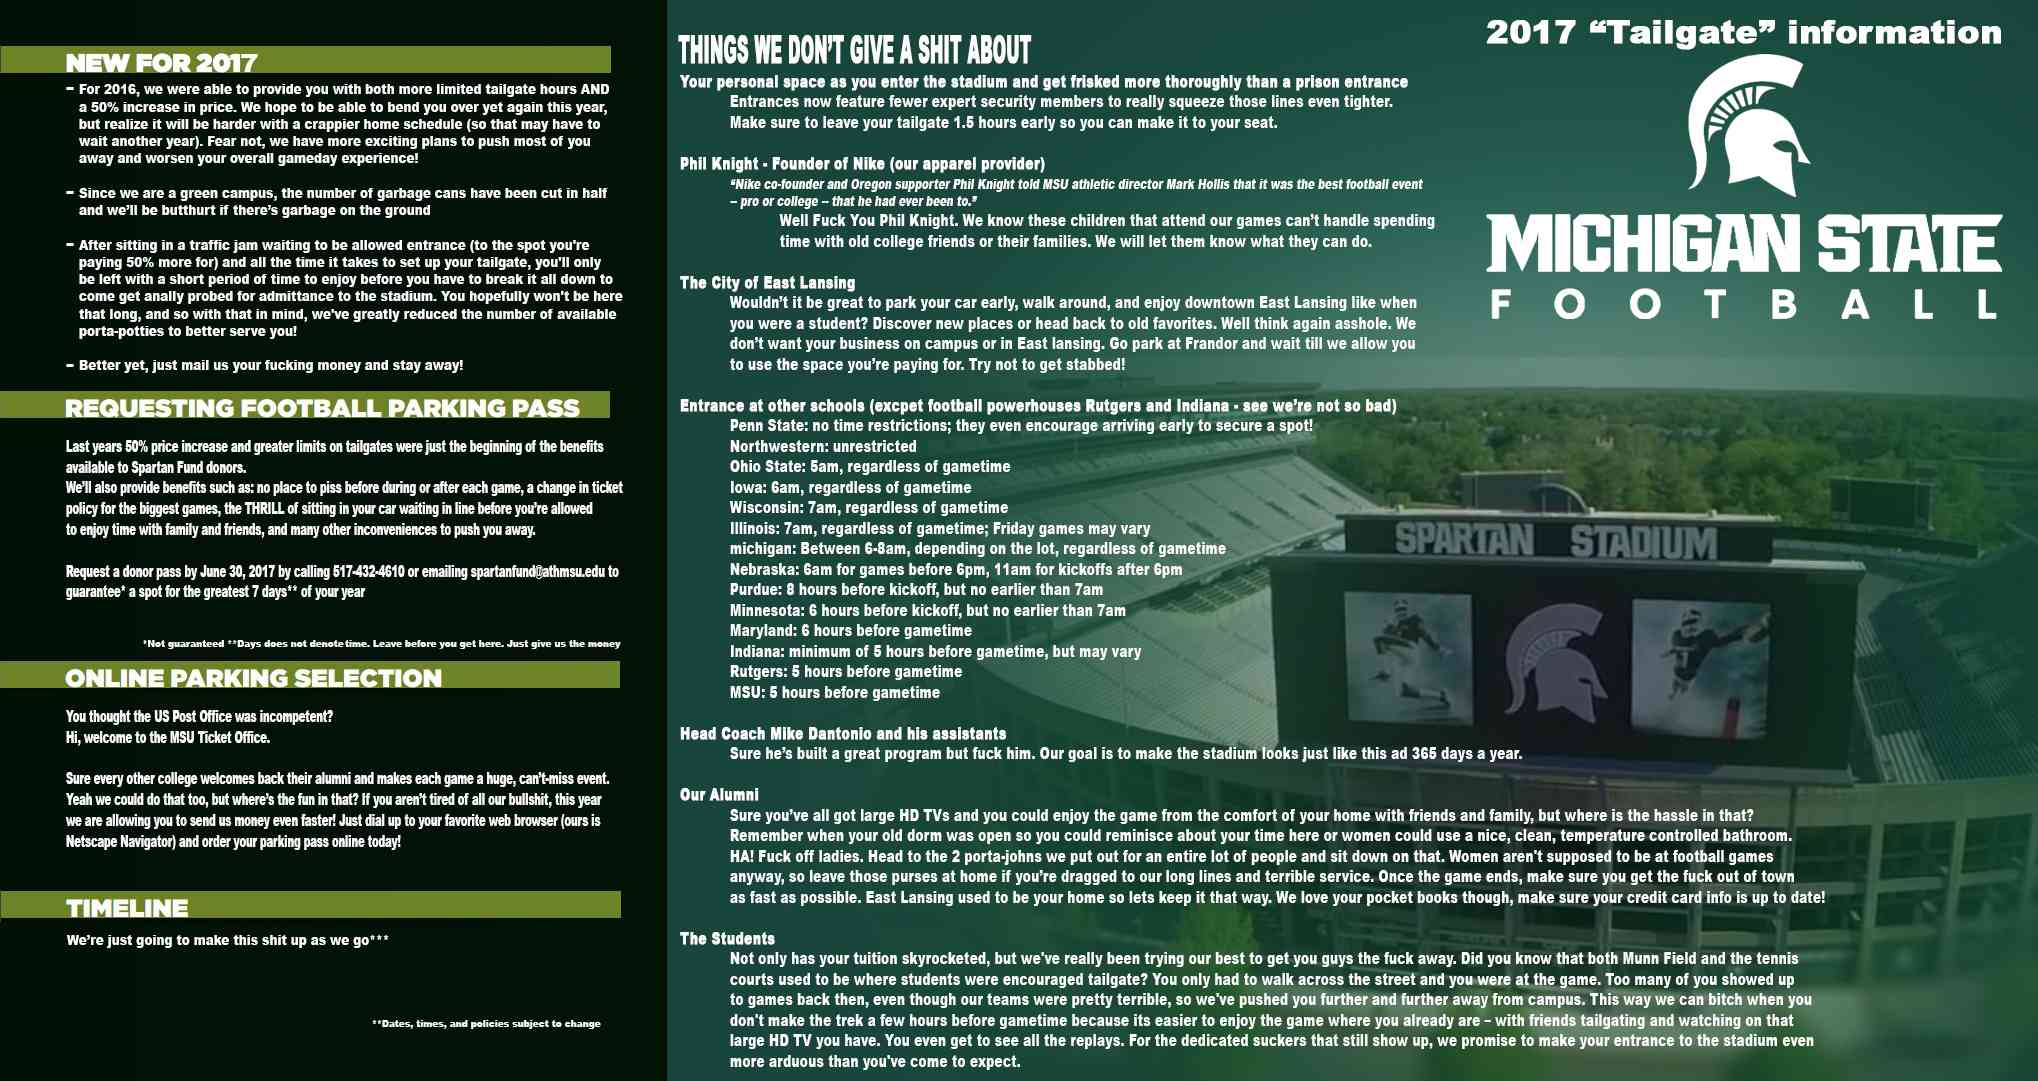 MSU tailgate document up and vanished from the interwebs... 2017ta12